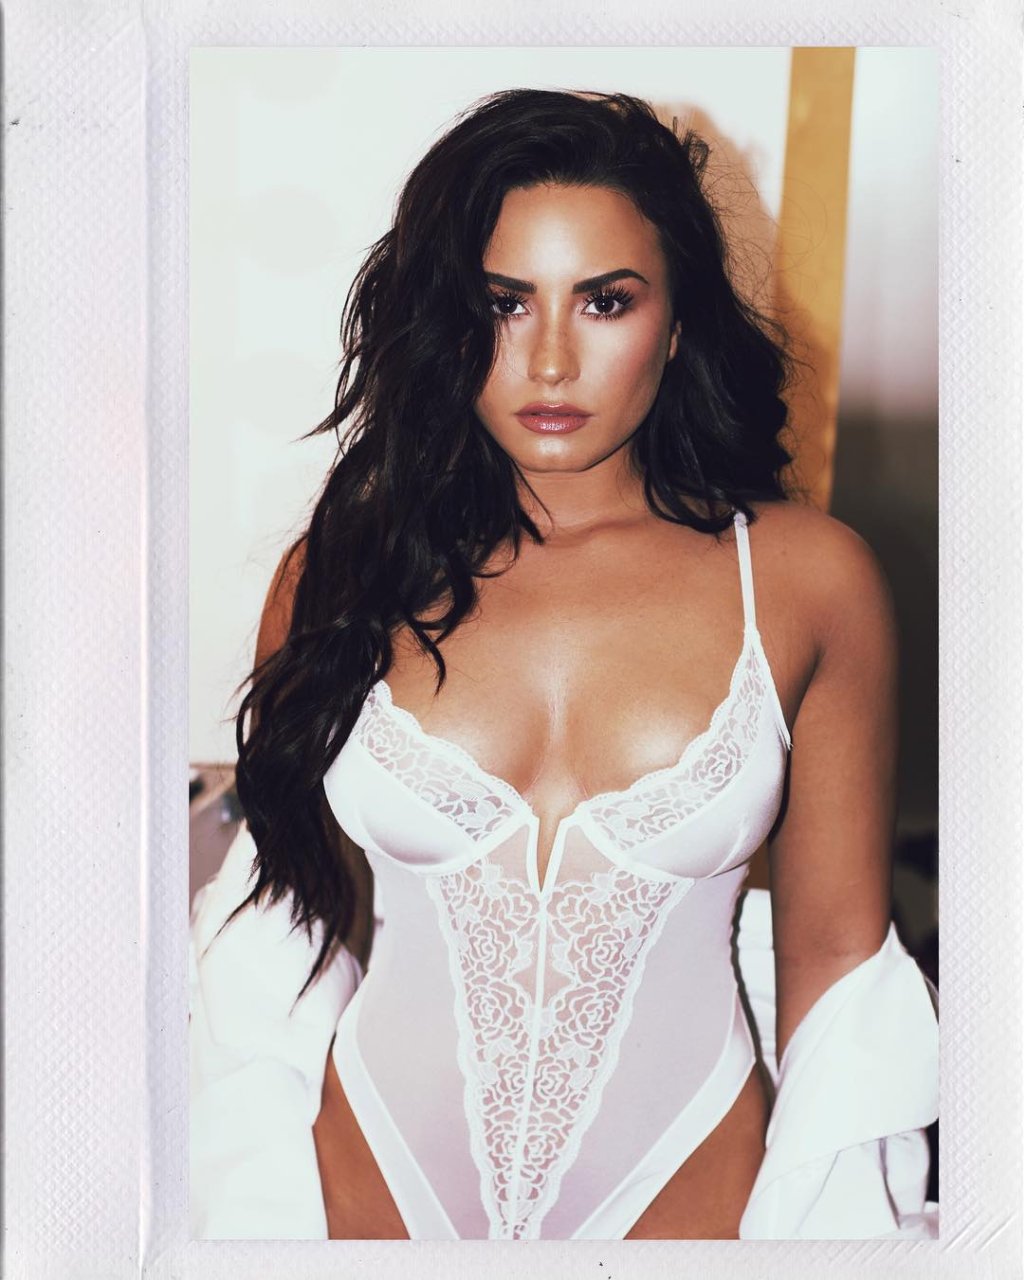 Demi Lovato Naked Lesbian - Demi Lovato Nude Photos and Videos | #TheFappening